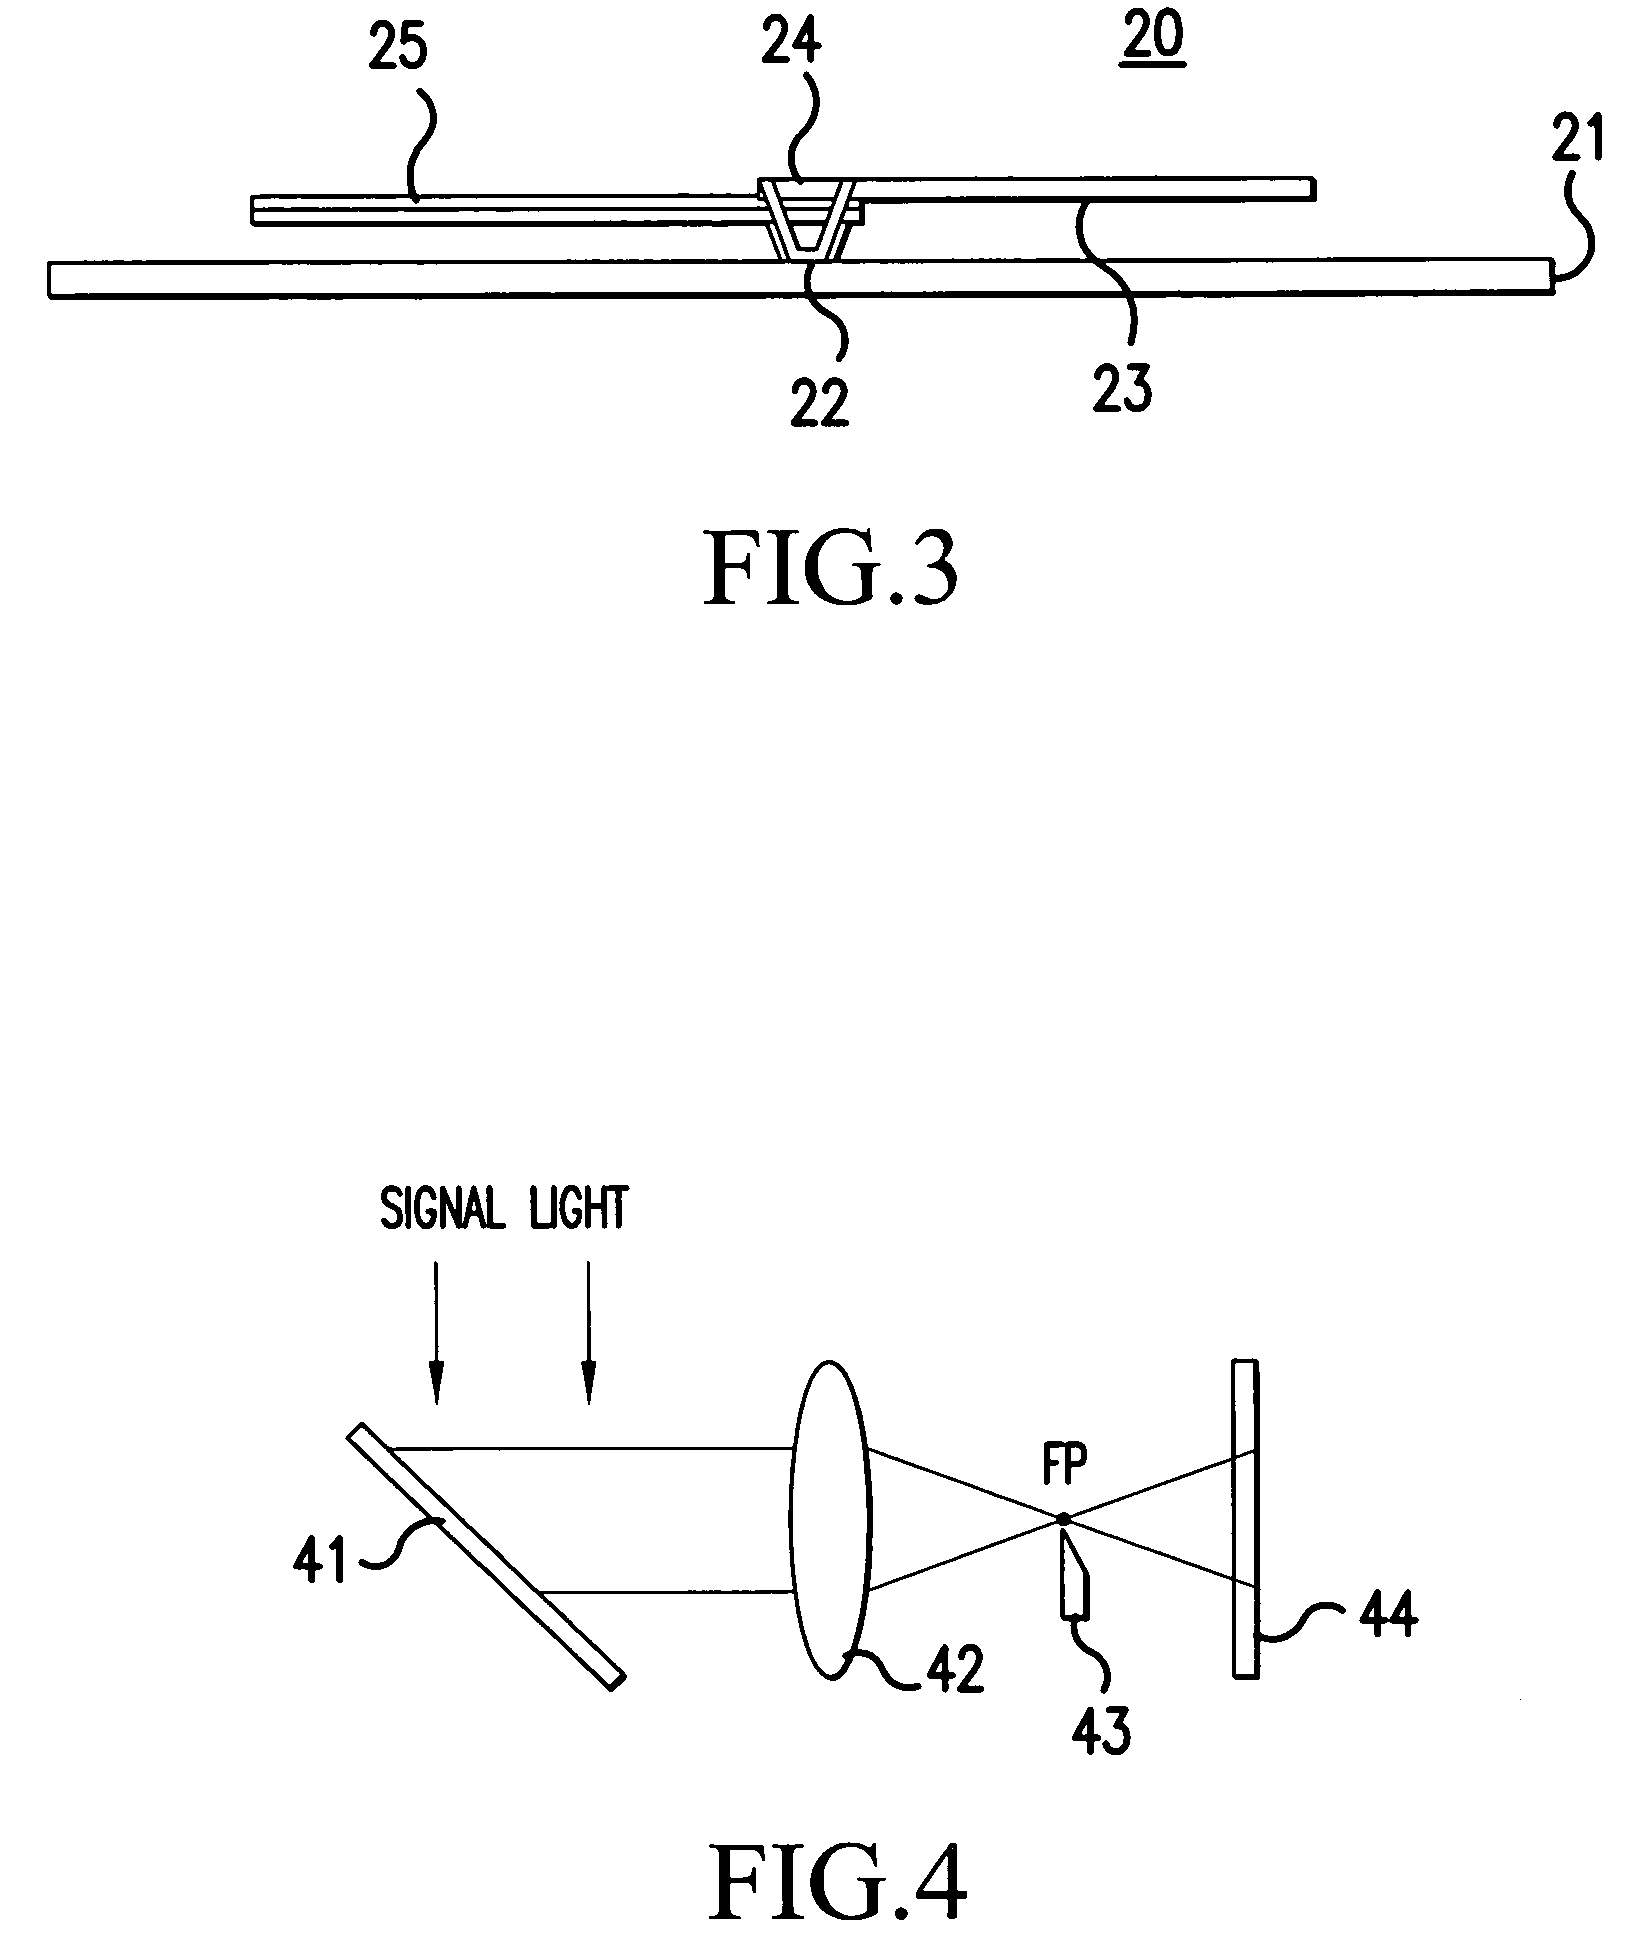 Passive broadband infrared optical limiter device based on a micro-optomechanical cantilever array